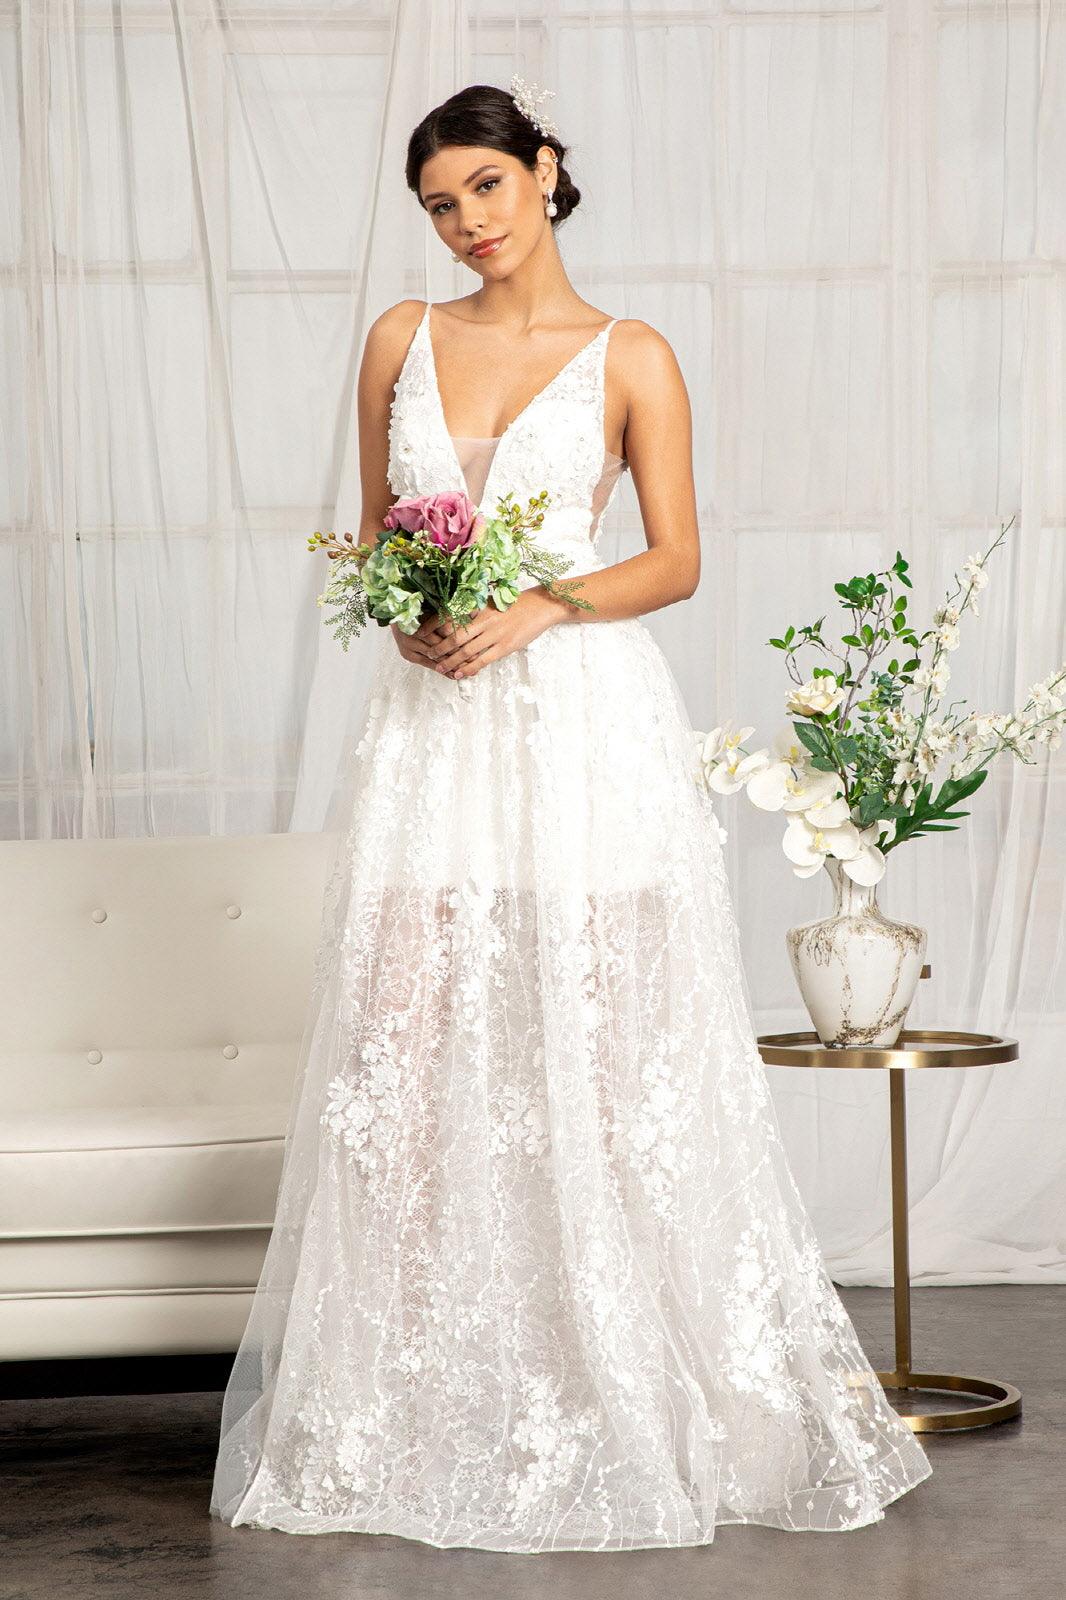 Long Spaghetti Strap Floral Applique Wedding Dress - The Dress Outlet